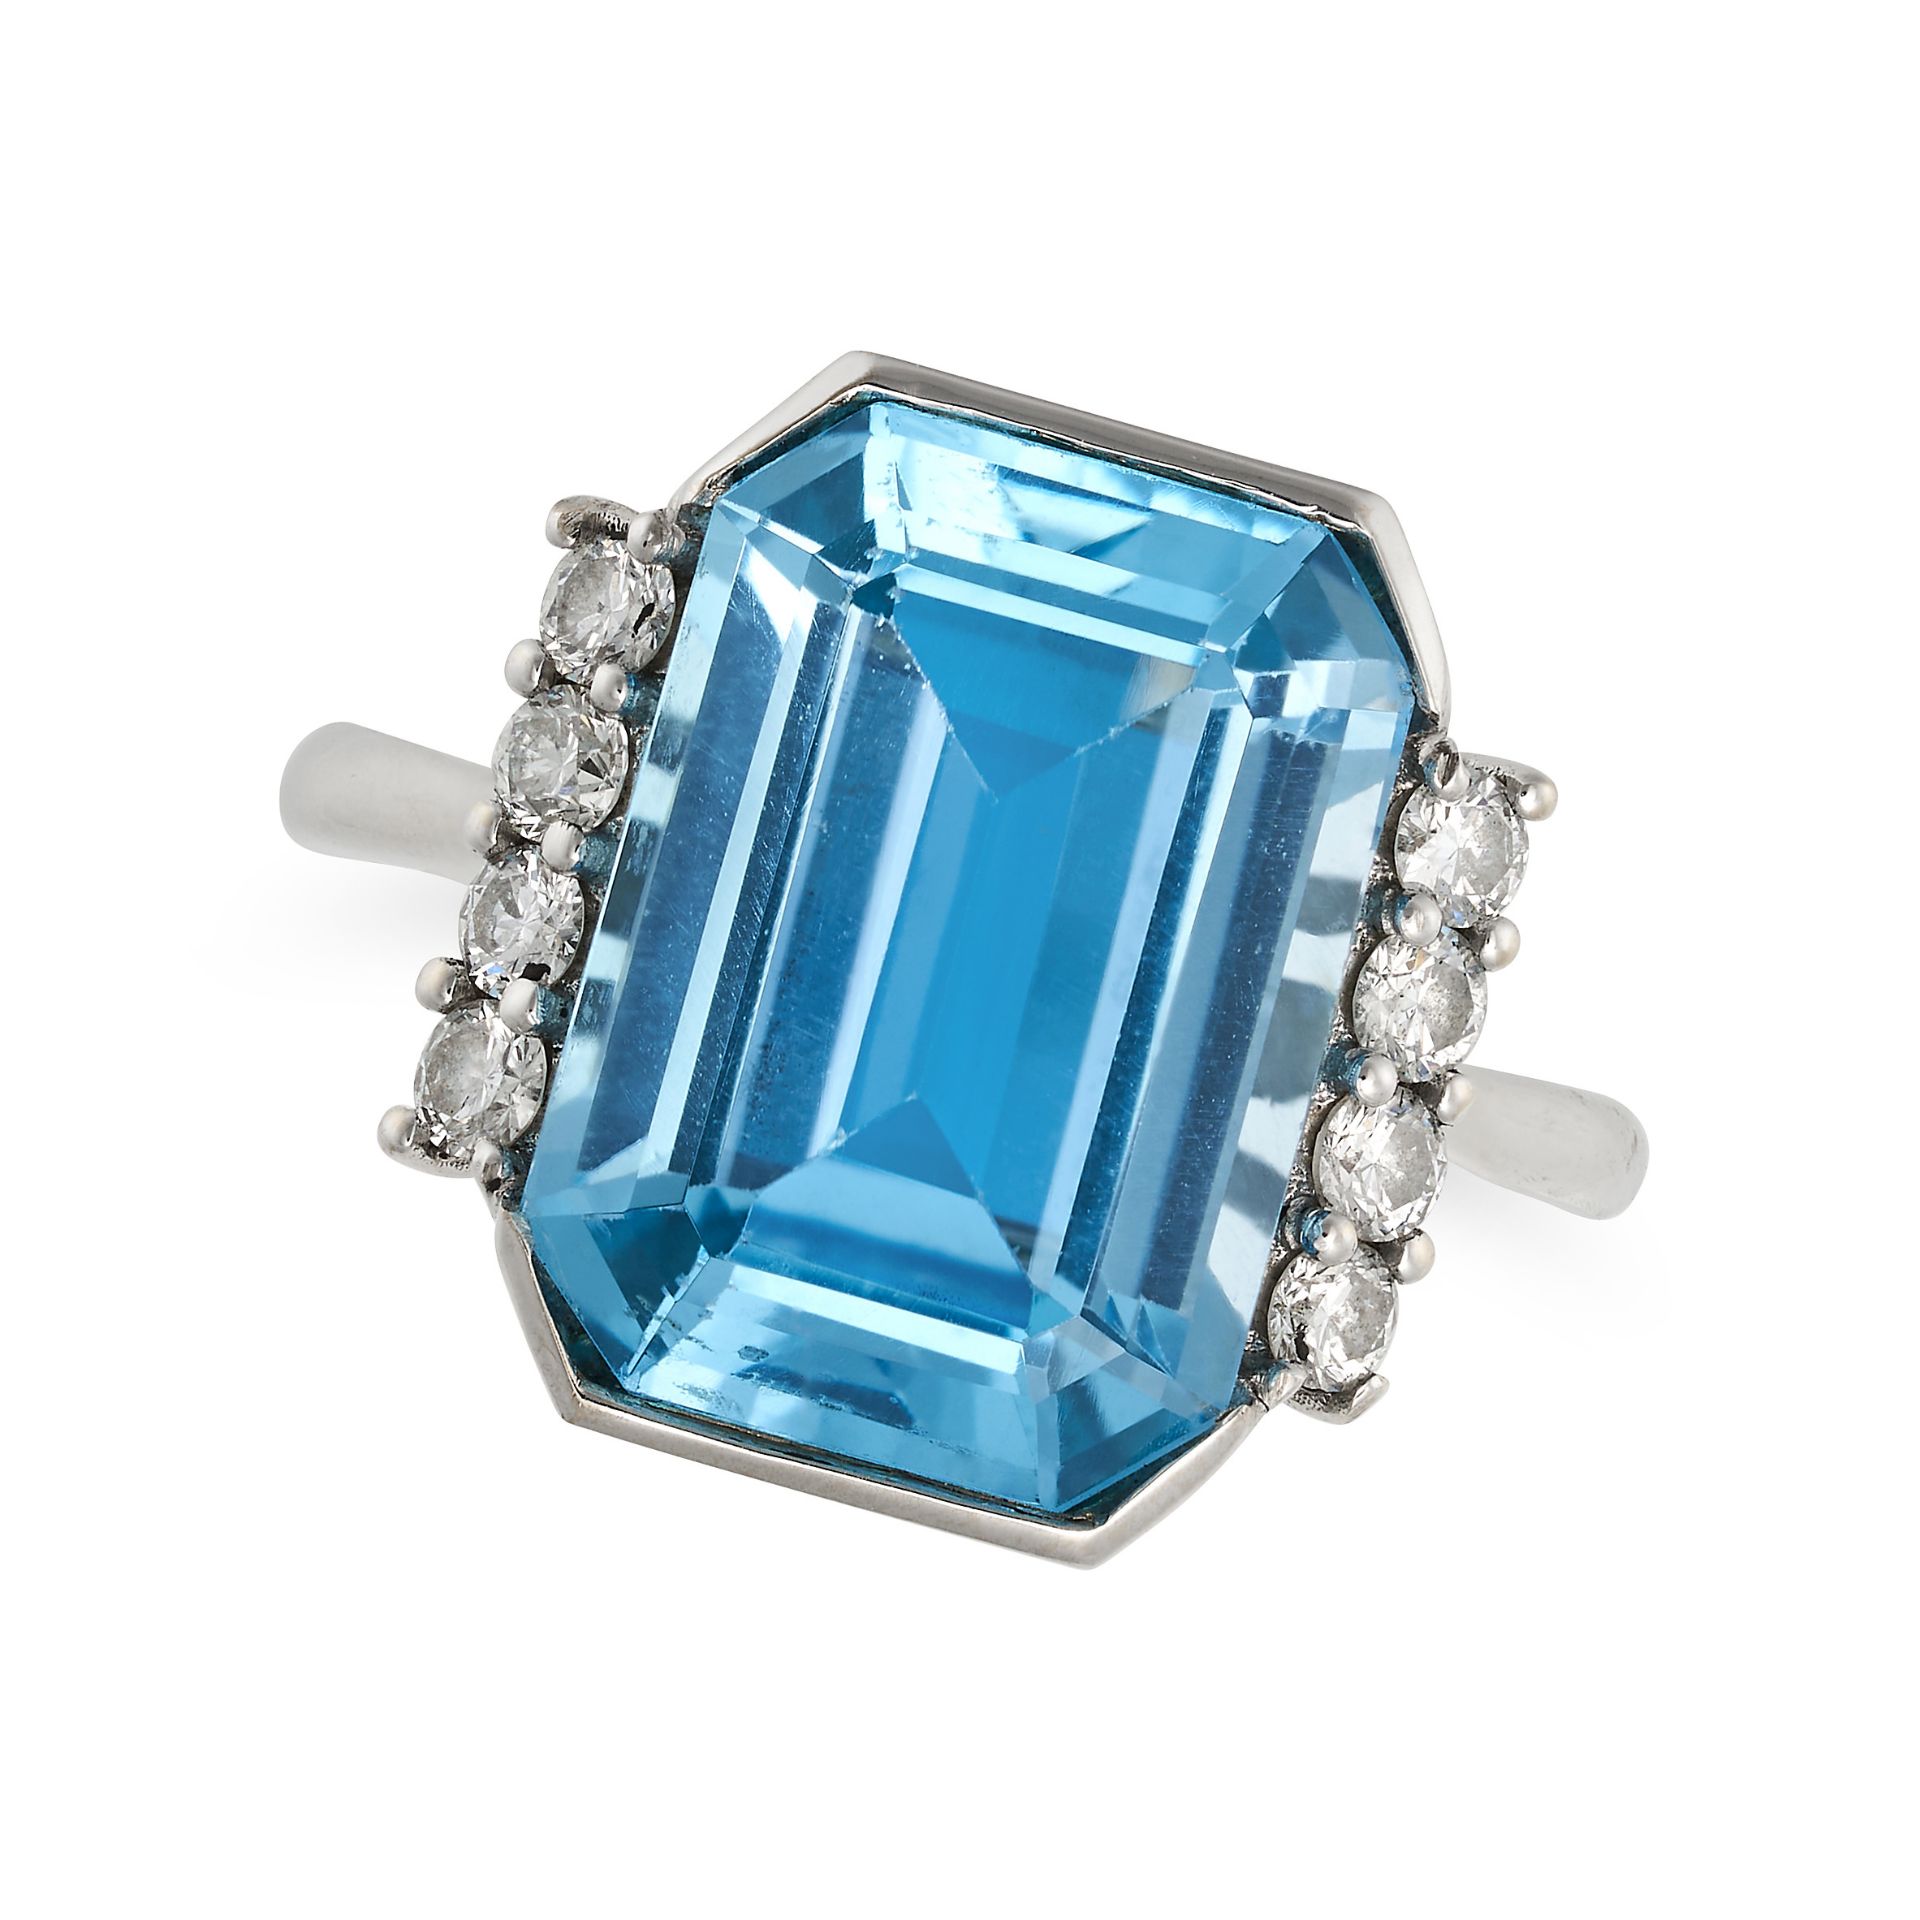 A BLUE TOPAZ AND DIAMOND RING in 18ct white gold, set with an octagonal step cut blue topaz of ap...